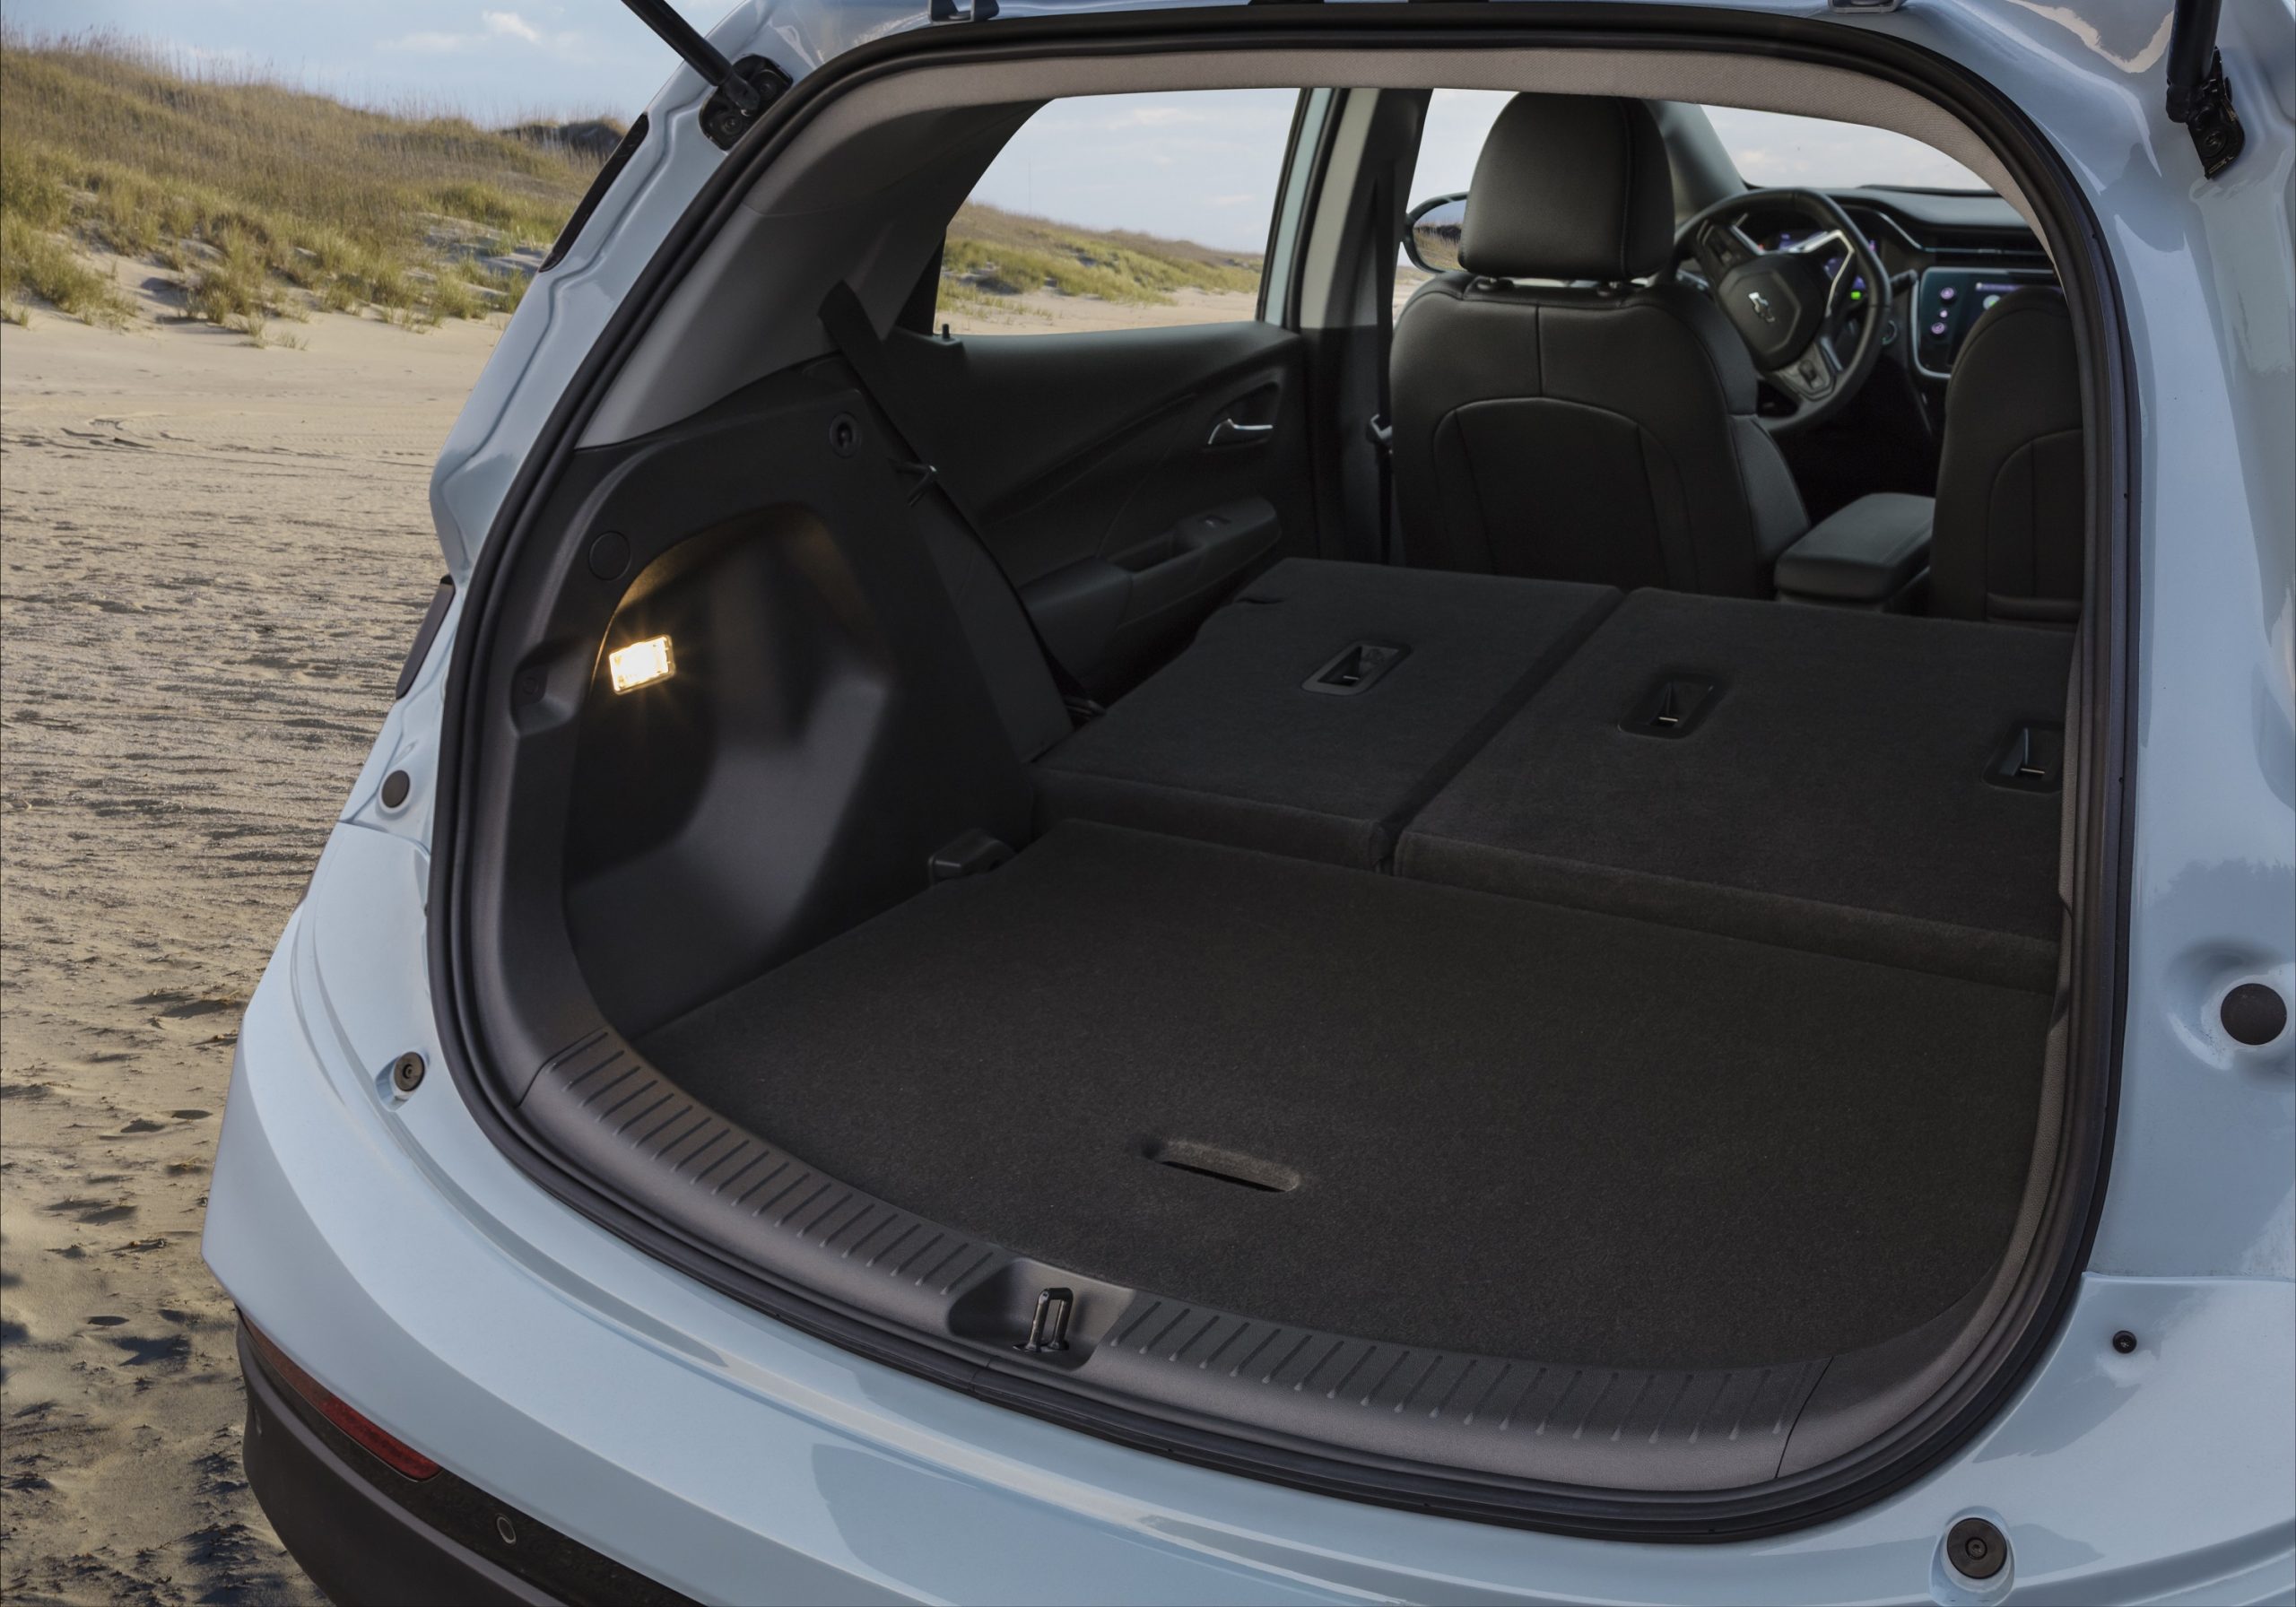 The rear hatch of a Chevy Bolt EV with the seats down